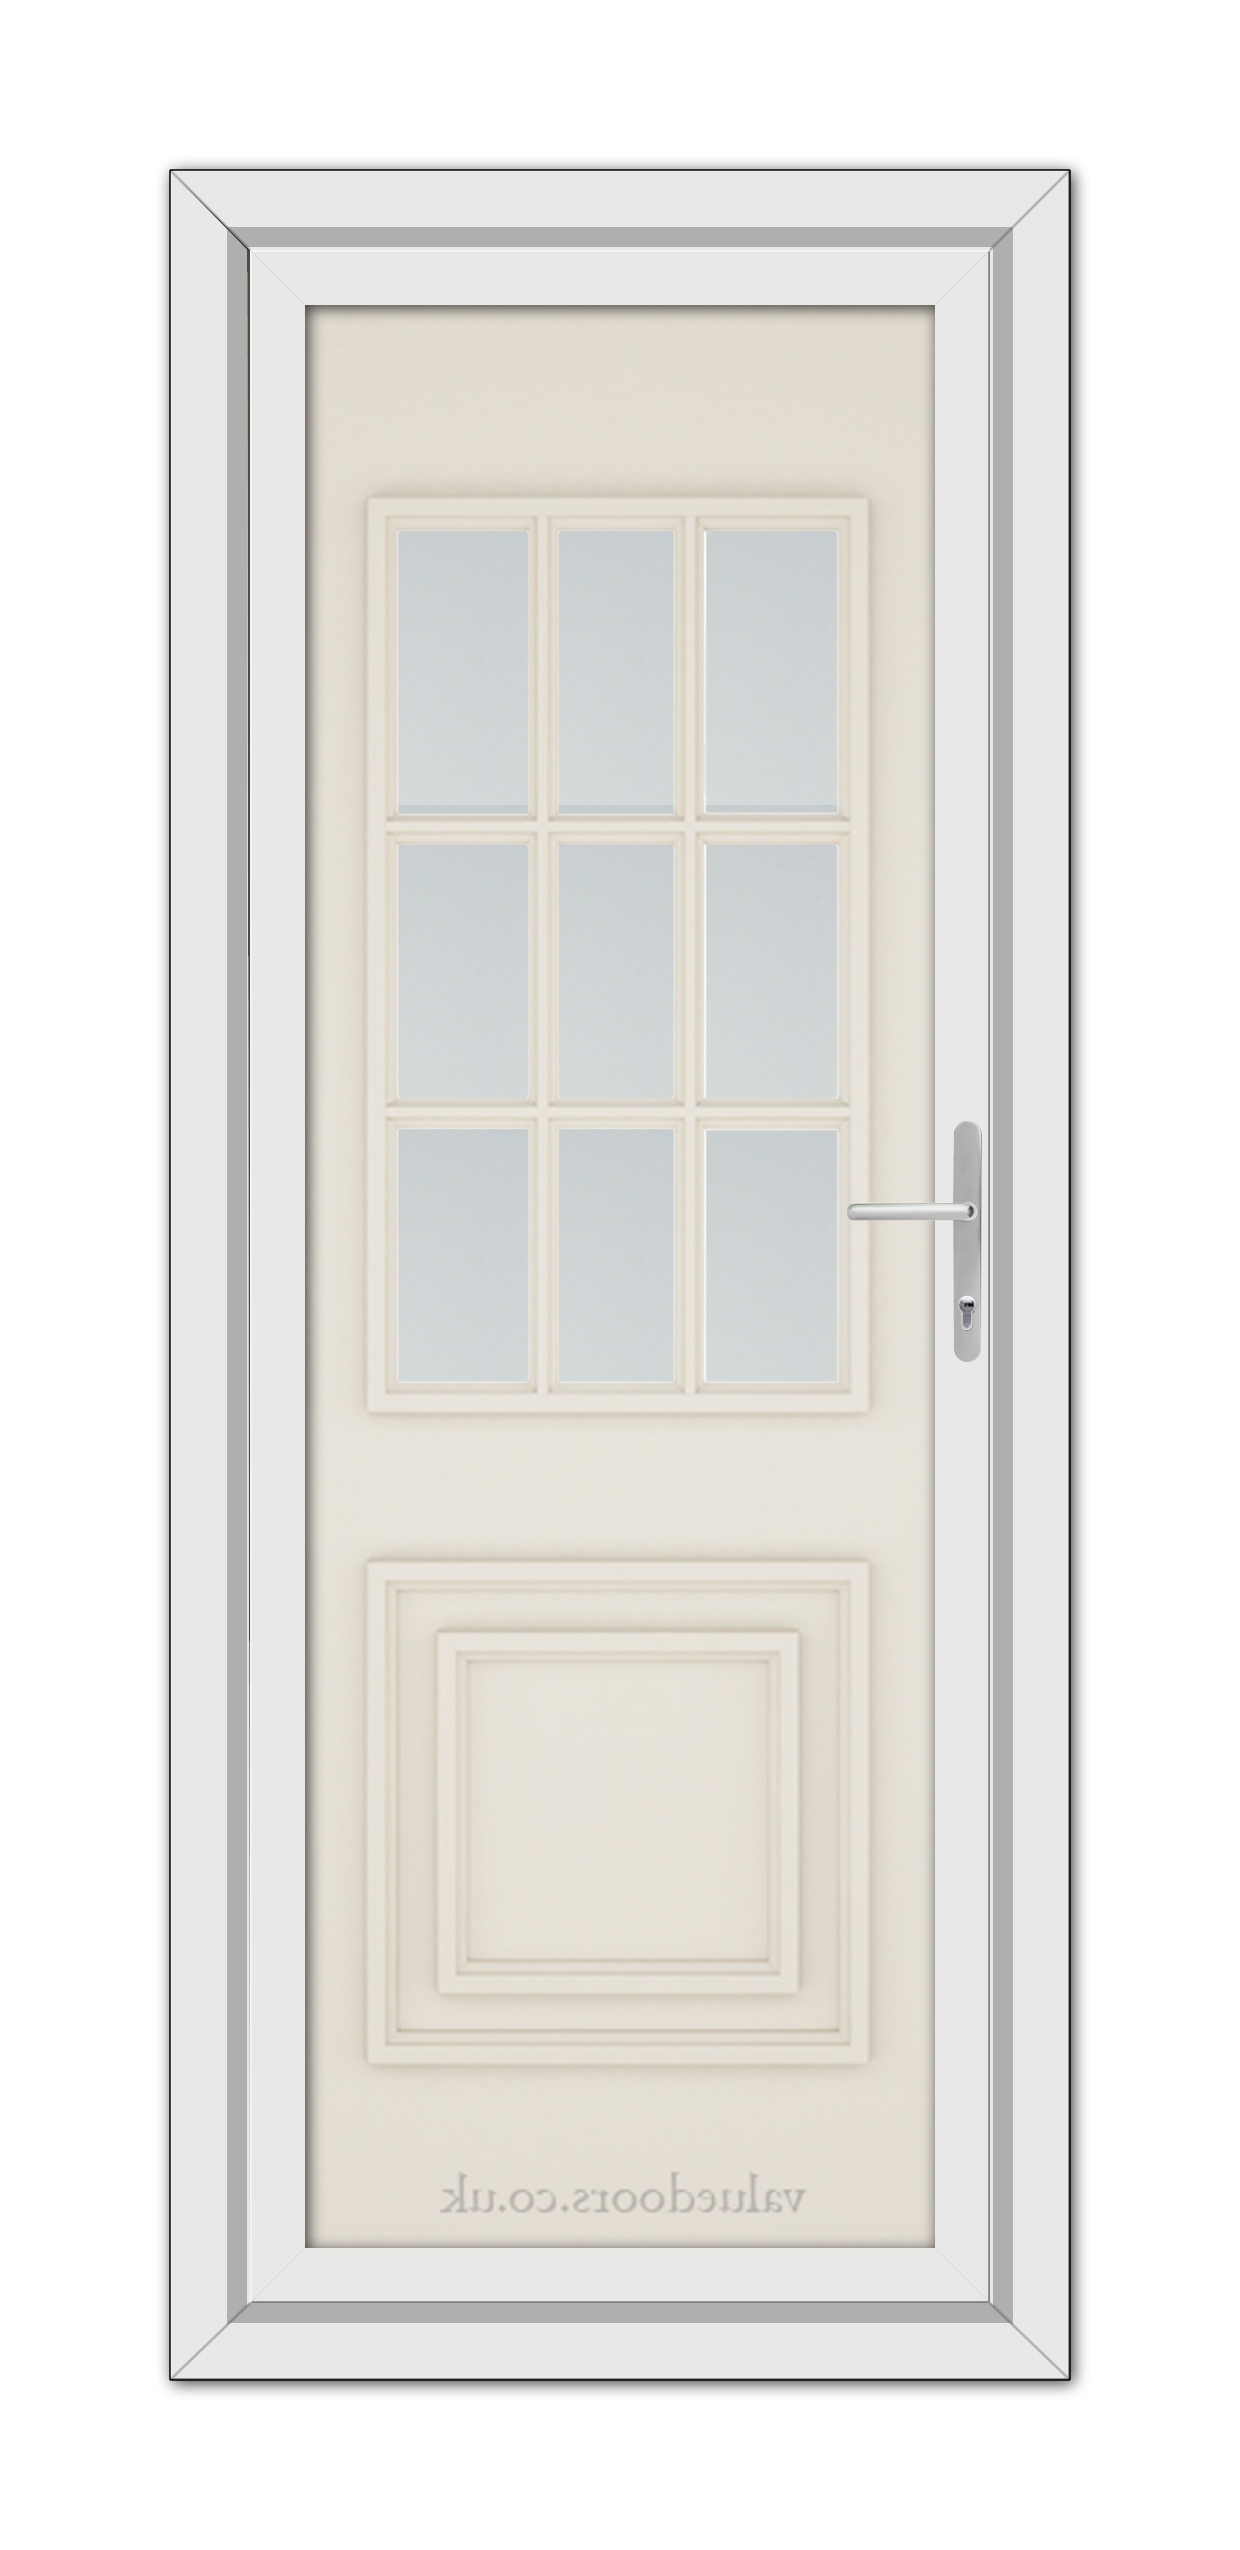 A vertical image of a closed Cream Cambridge One uPVC Door with a nine-pane frosted glass window at the top and a decorative panel at the bottom, featuring a silver handle on the right side.